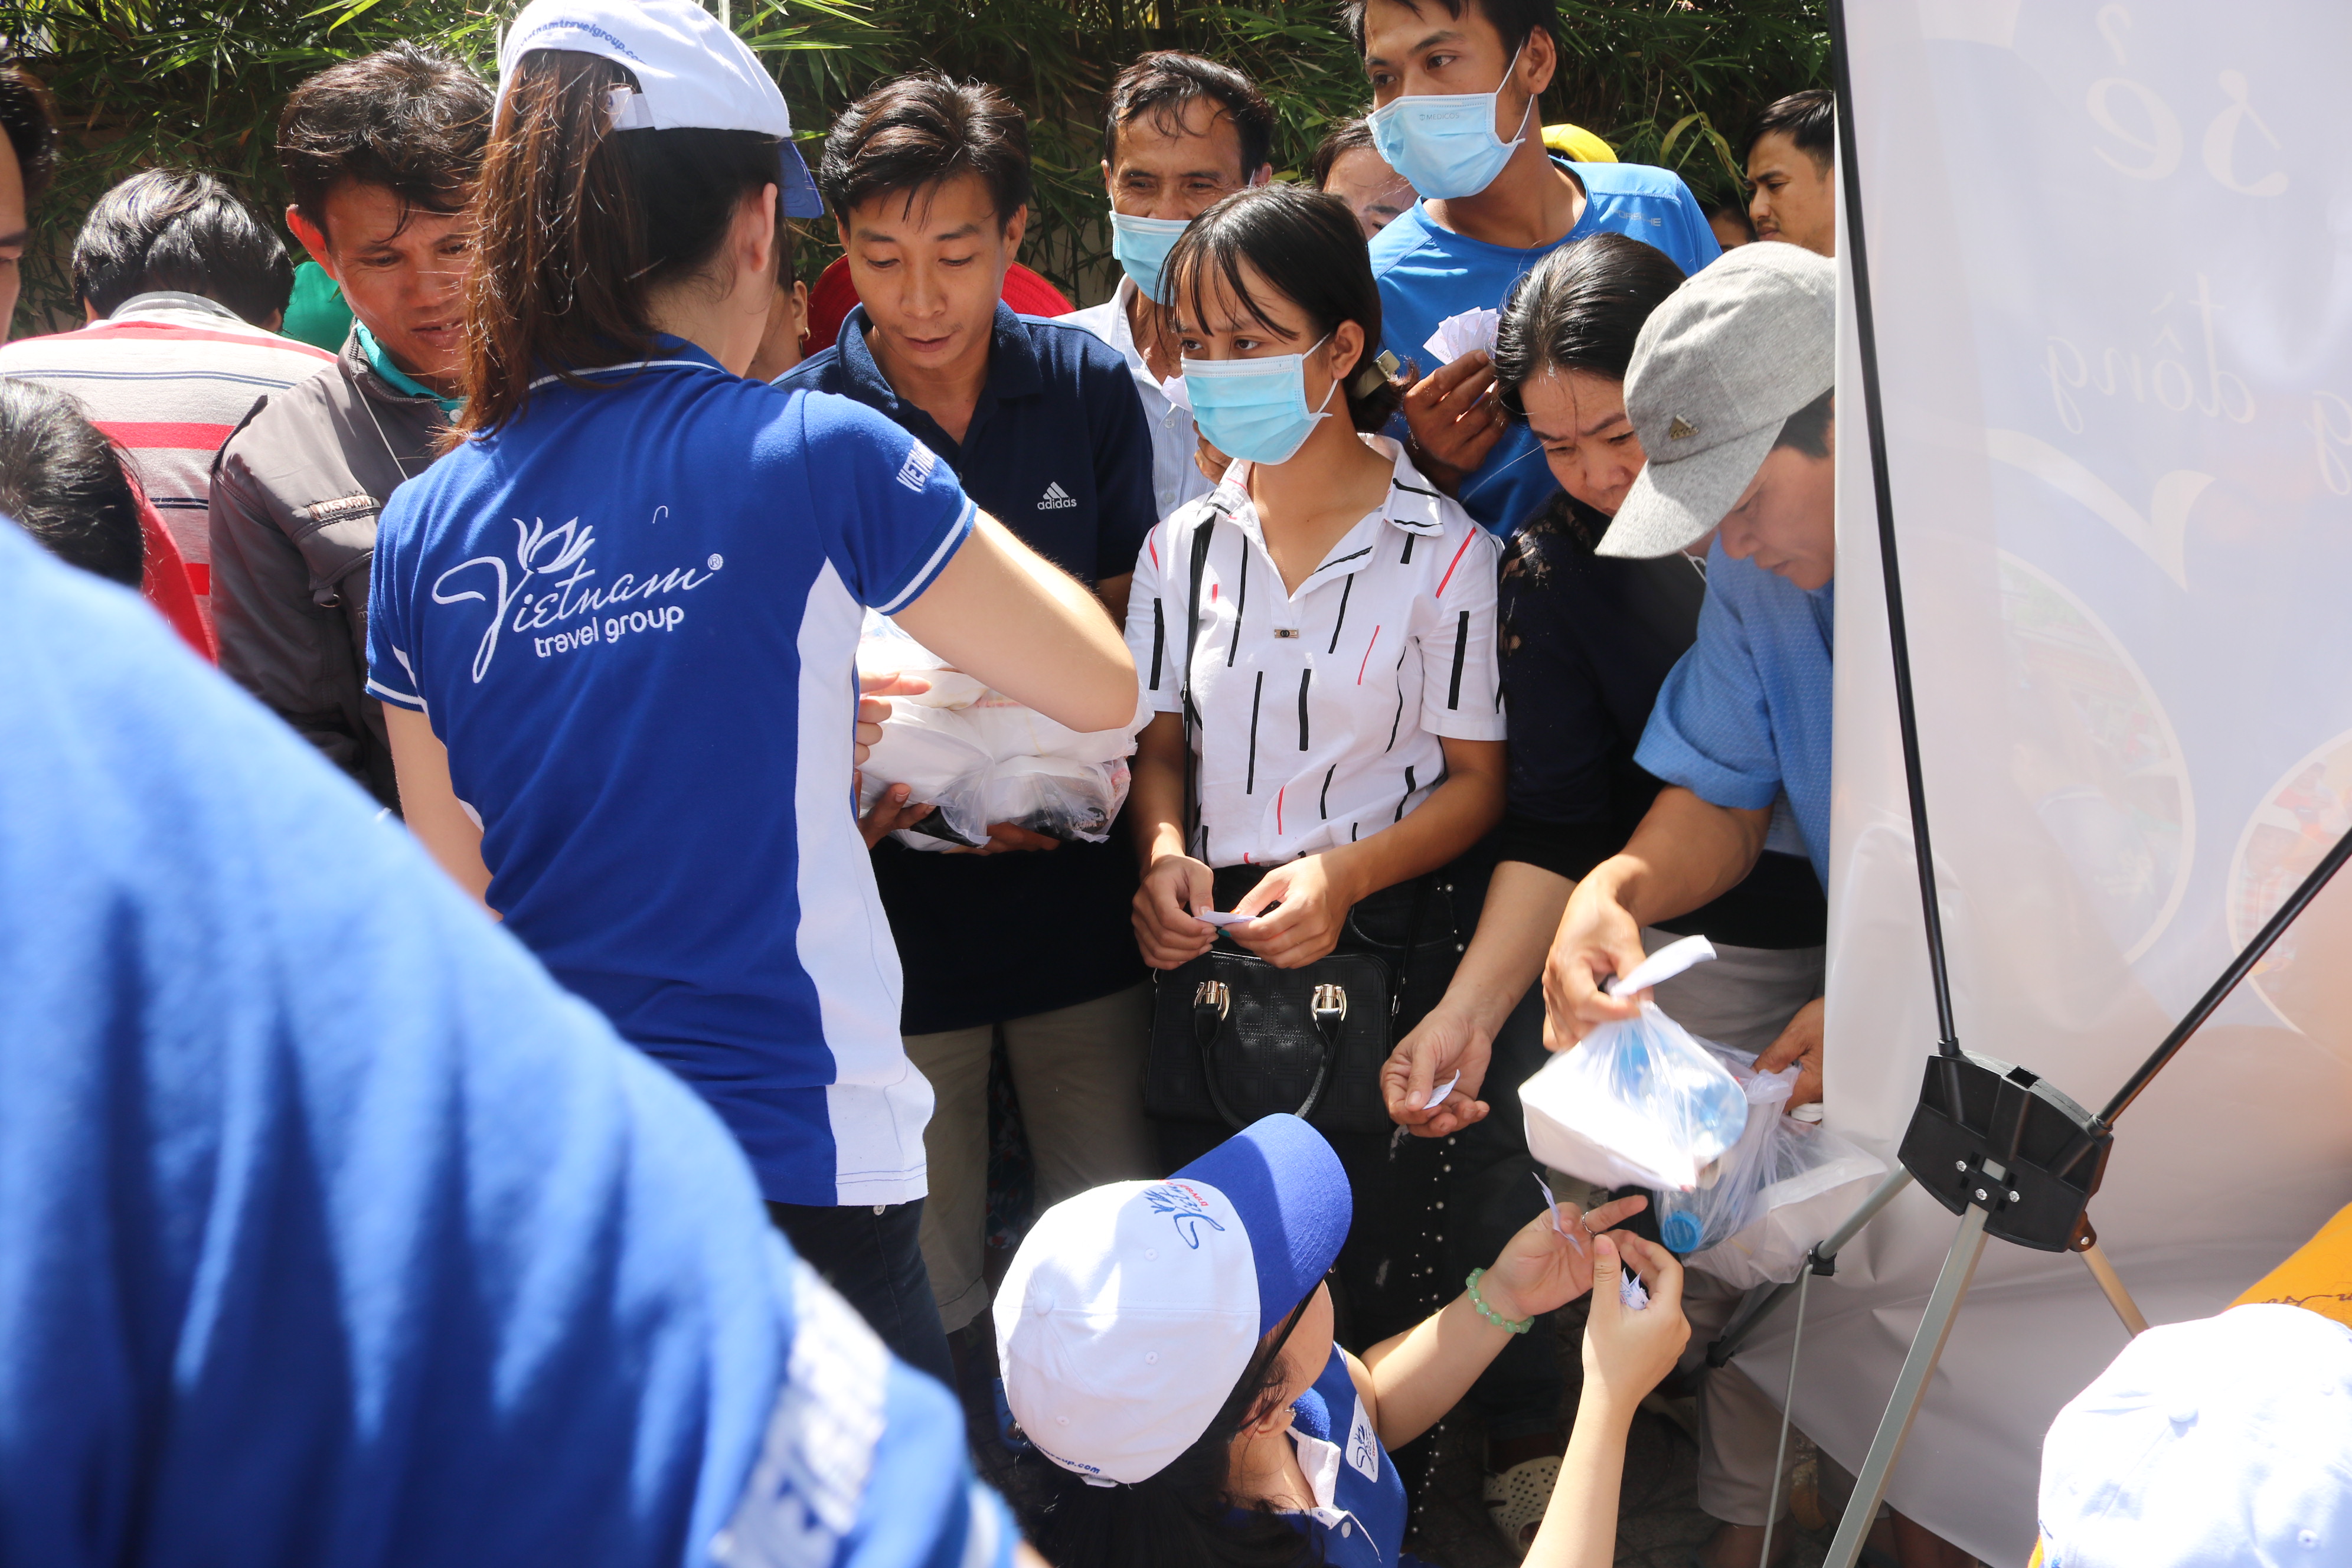 Vietnam Travel Group Team in action at Cho Ray Hospital